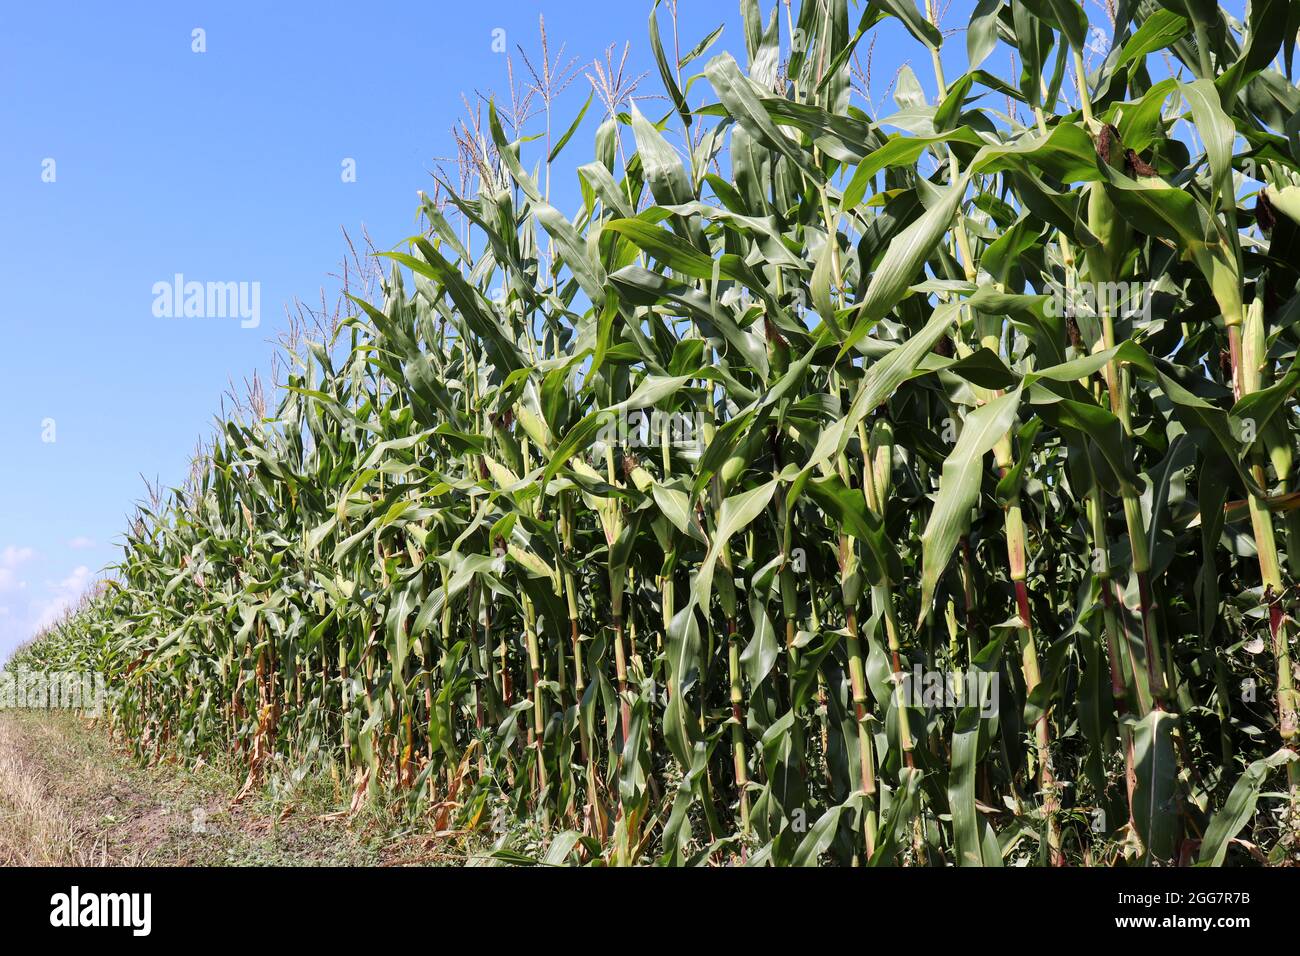 Corn field against blue sky. Agricultural industry, green corn stalks with cobs Stock Photo